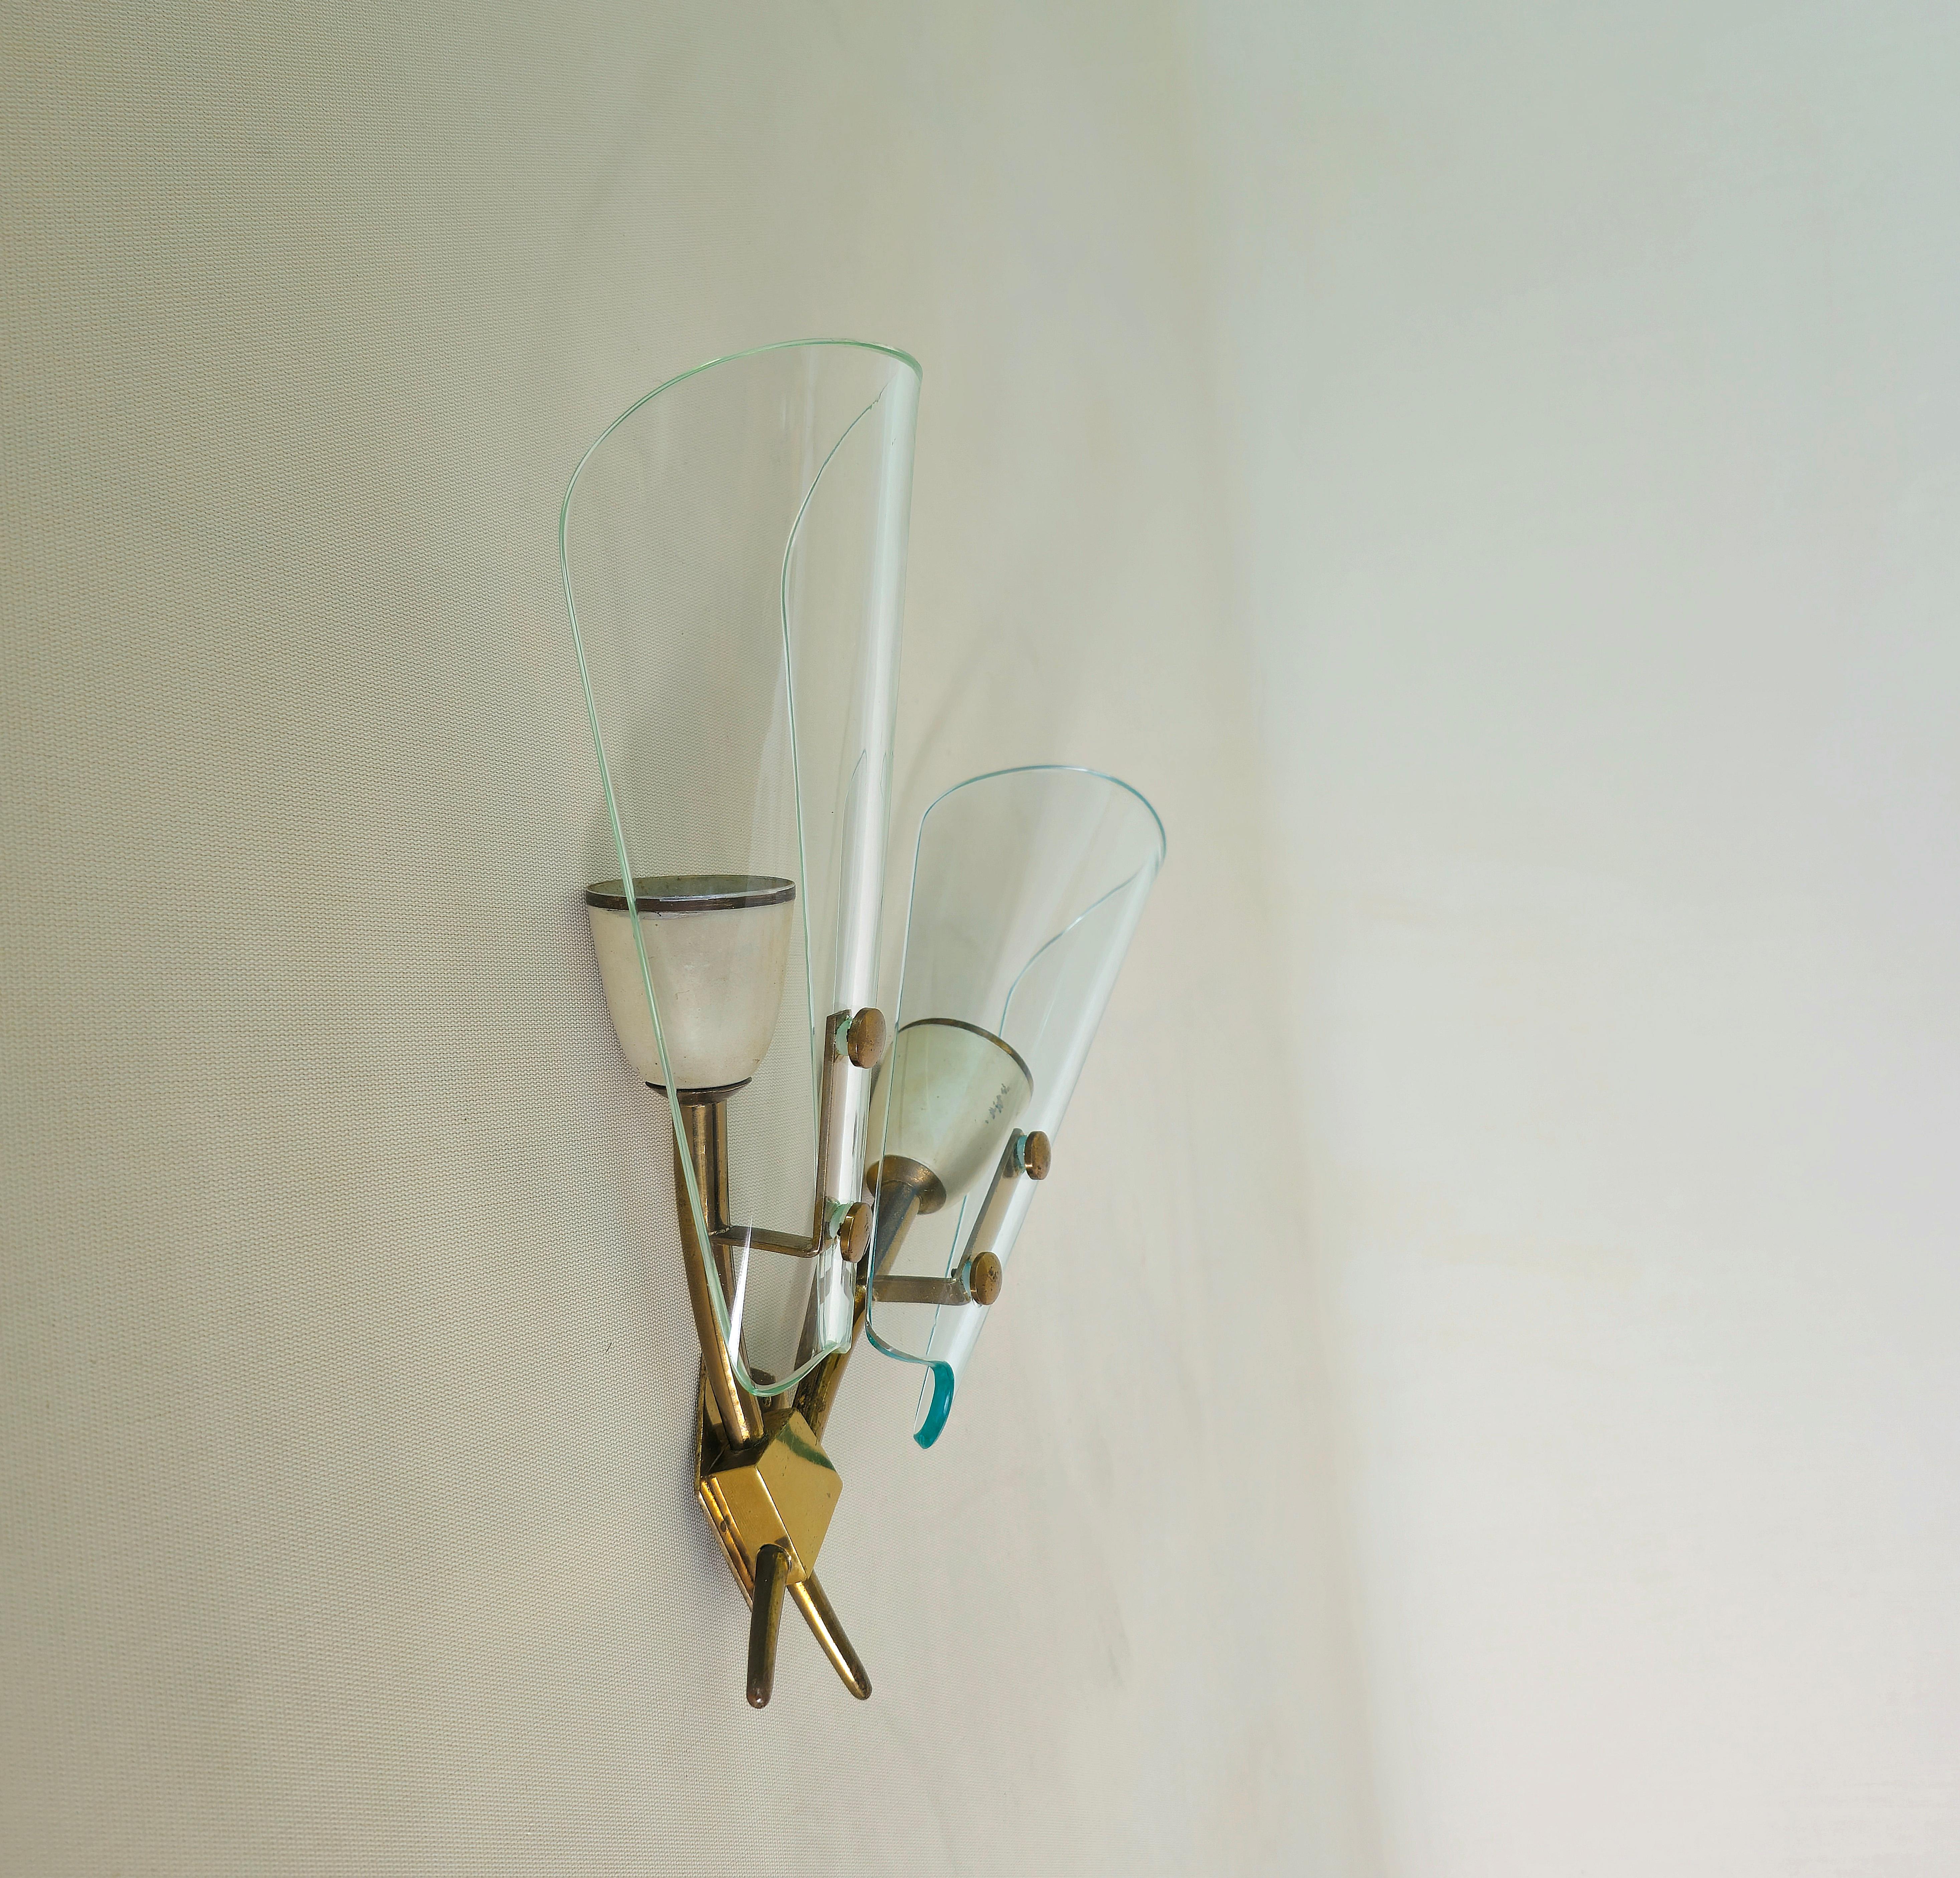 Wall Light Sconce Brass Curved Glass Midcentury Modern Italian Design 1950s For Sale 6